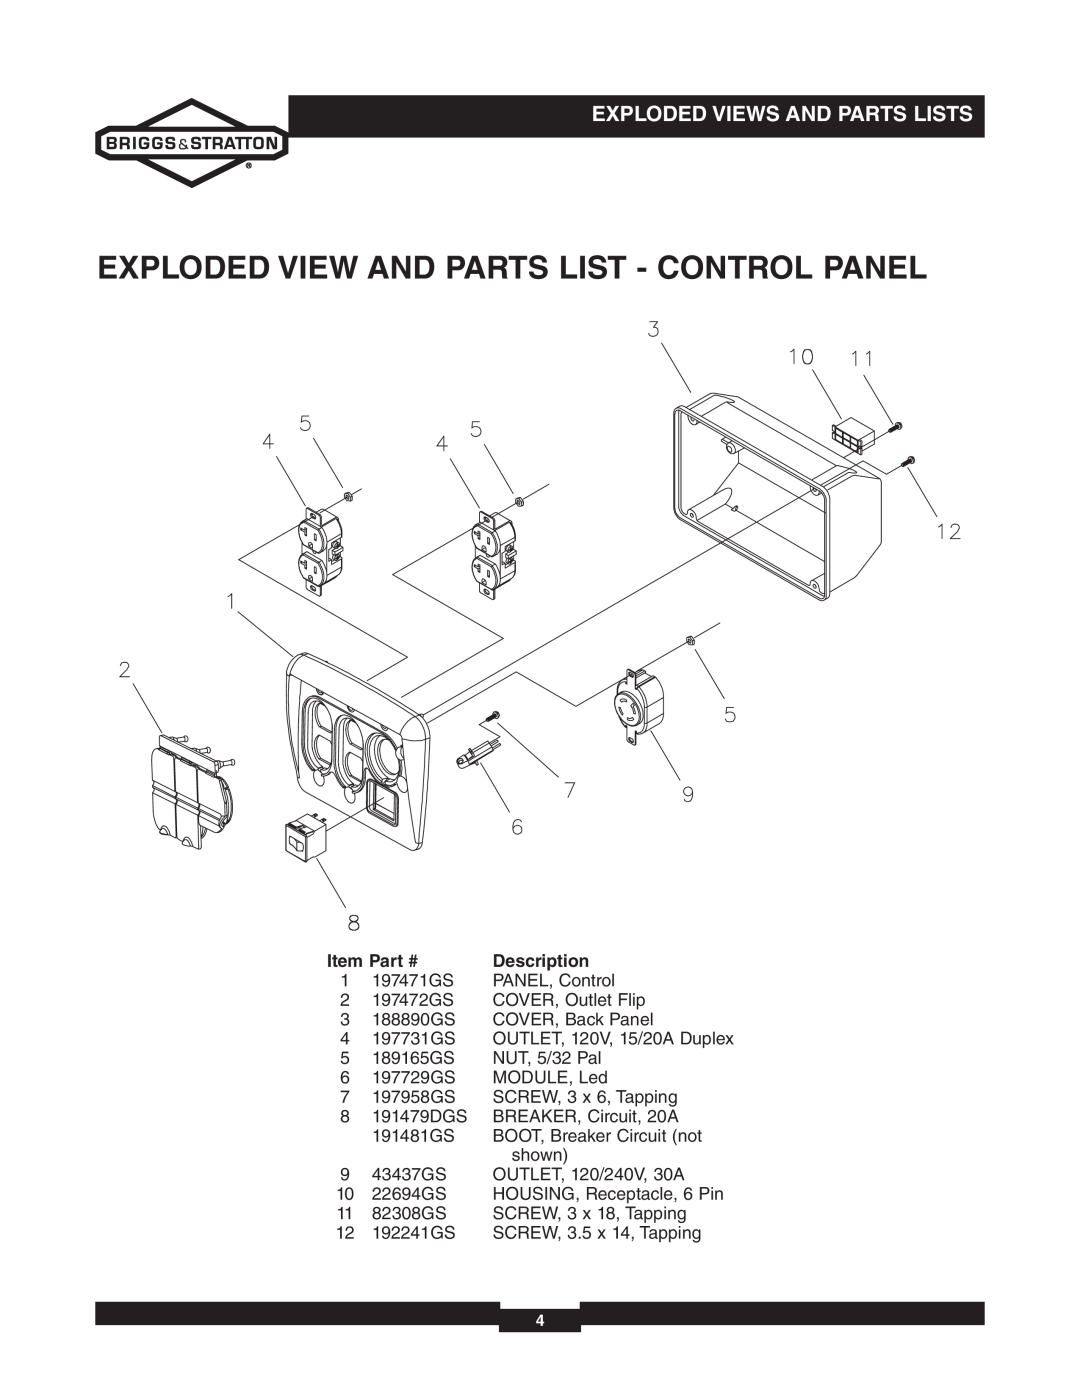 Briggs & Stratton 030235-02 manual Exploded View And Parts List - Control Panel, 1 197471GS, PANEL, Control, Description 